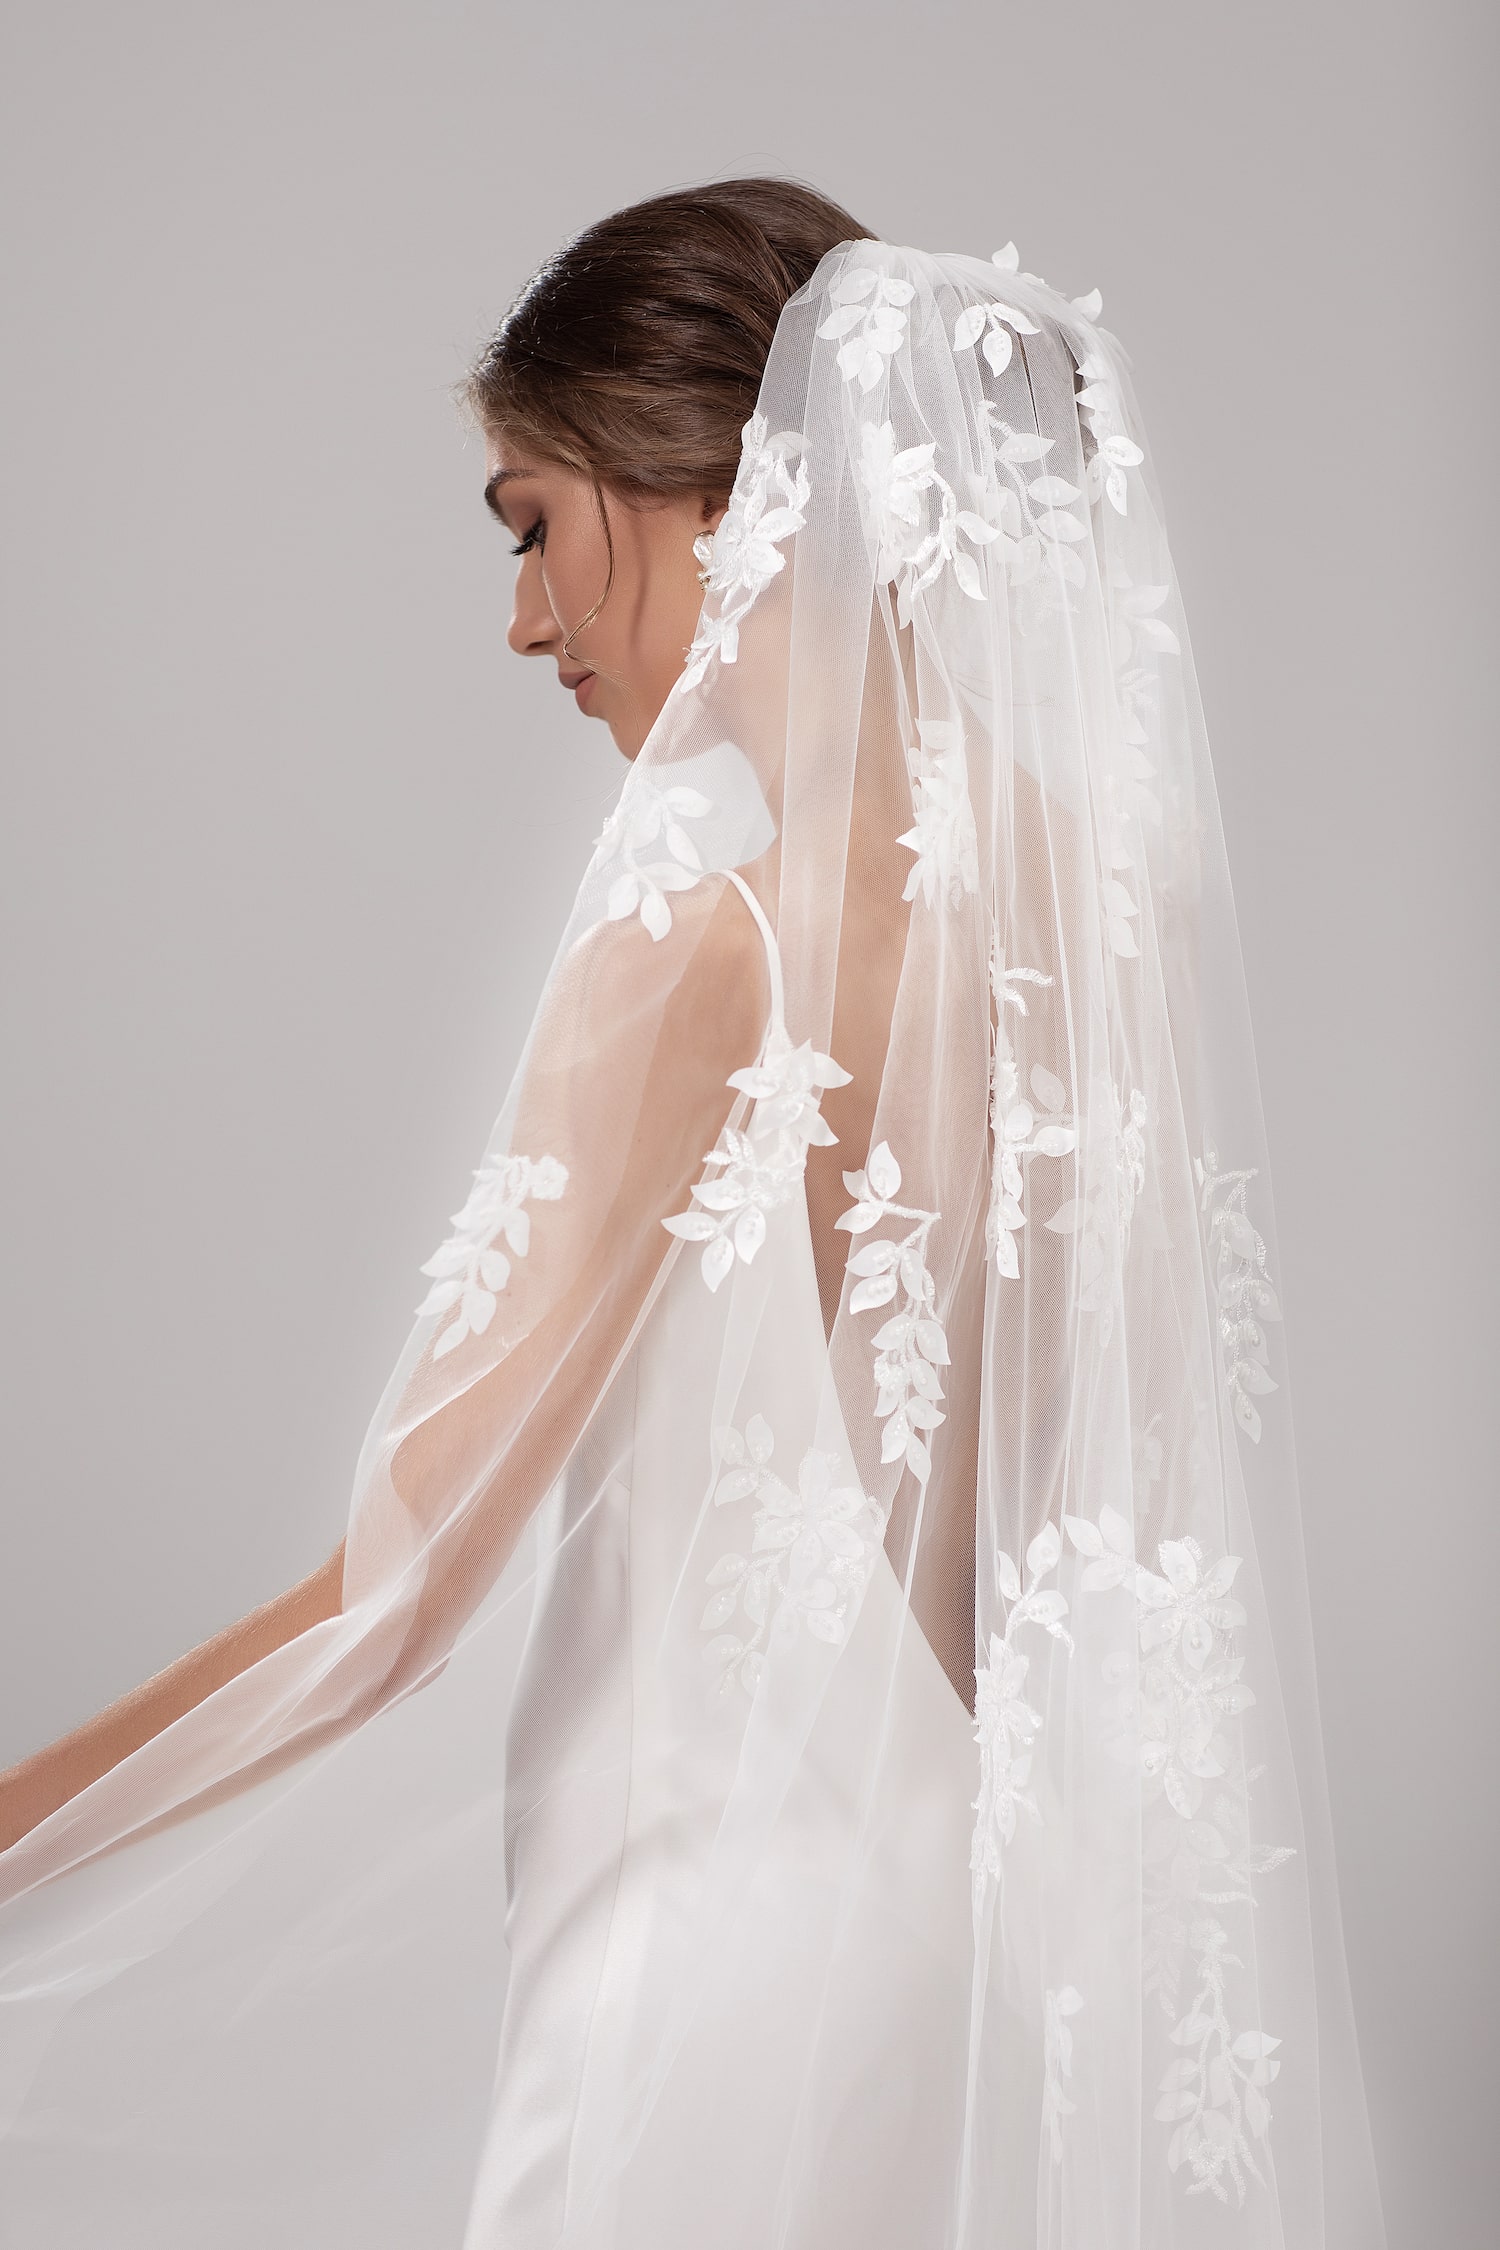 A softly gathered single layer veil with floral 3D lace appliqué trailing from the comb to fingertips.